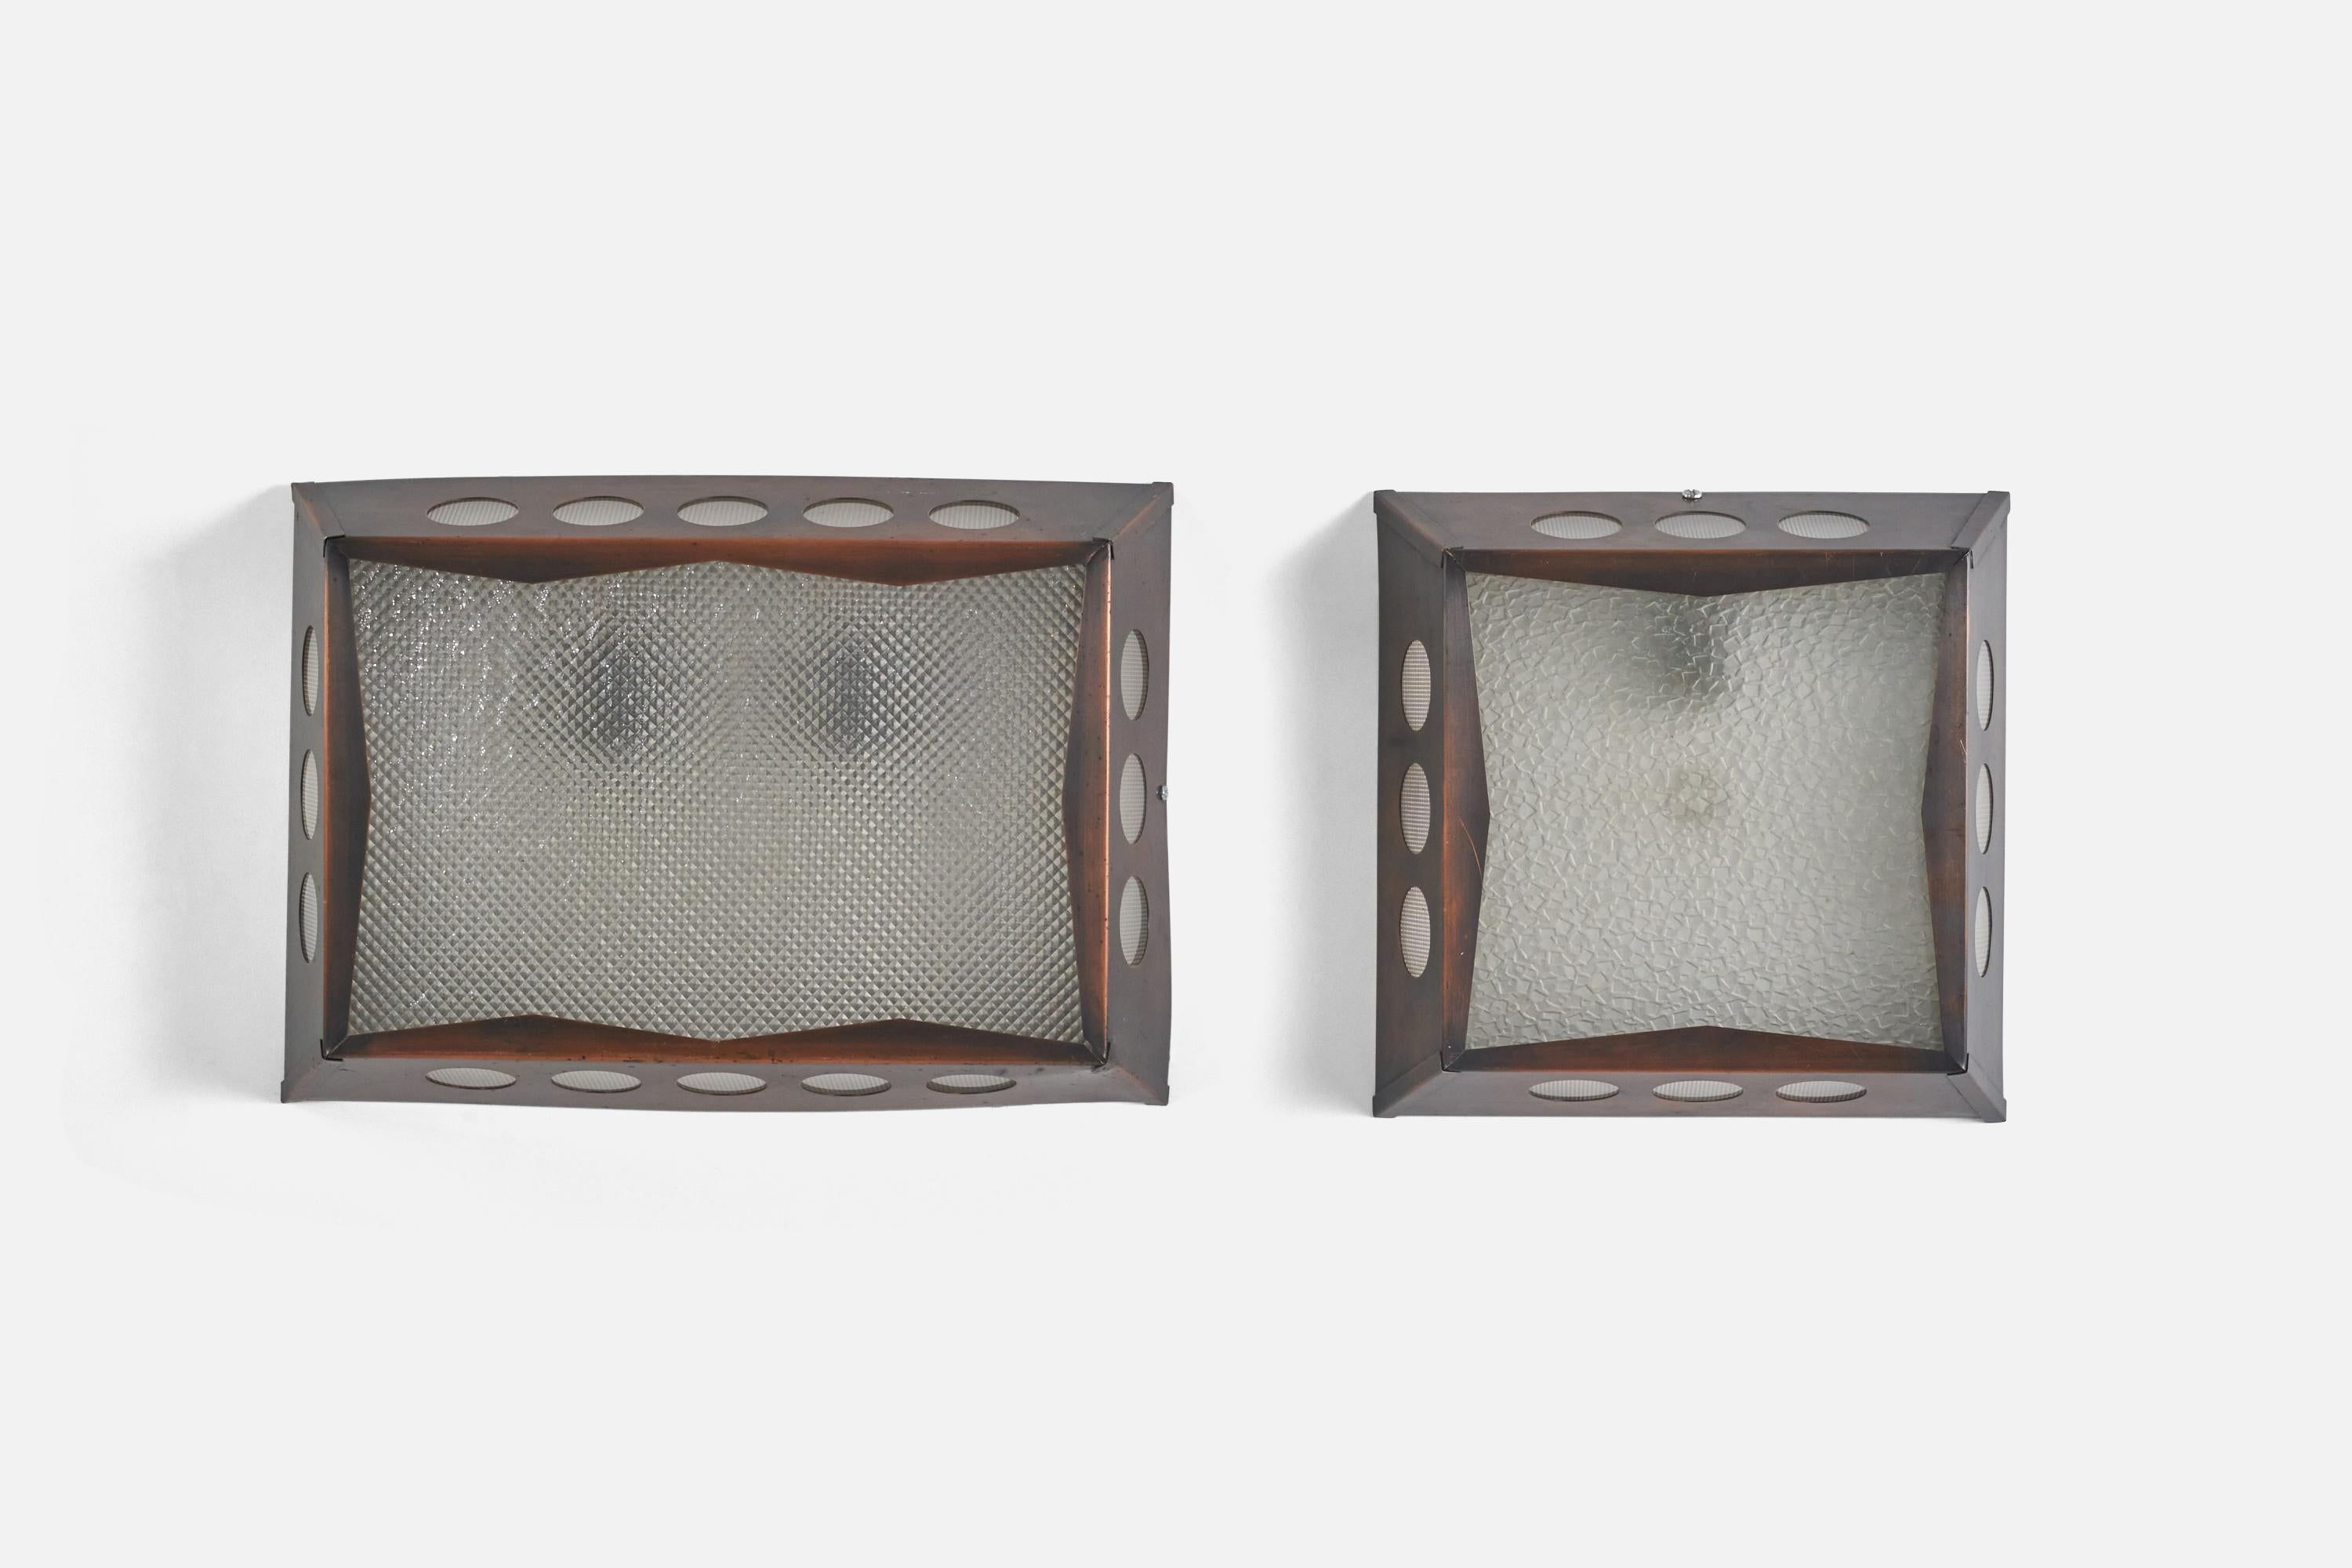 A pair of copper and glass sconces / wall lights designed and produced by Nils H. Ledung, Sweden, 1960s.

Socket takes standard E-26 medium base bulb.

There is no maximum wattage stated on the fixture.

Measurements listed are of Largest